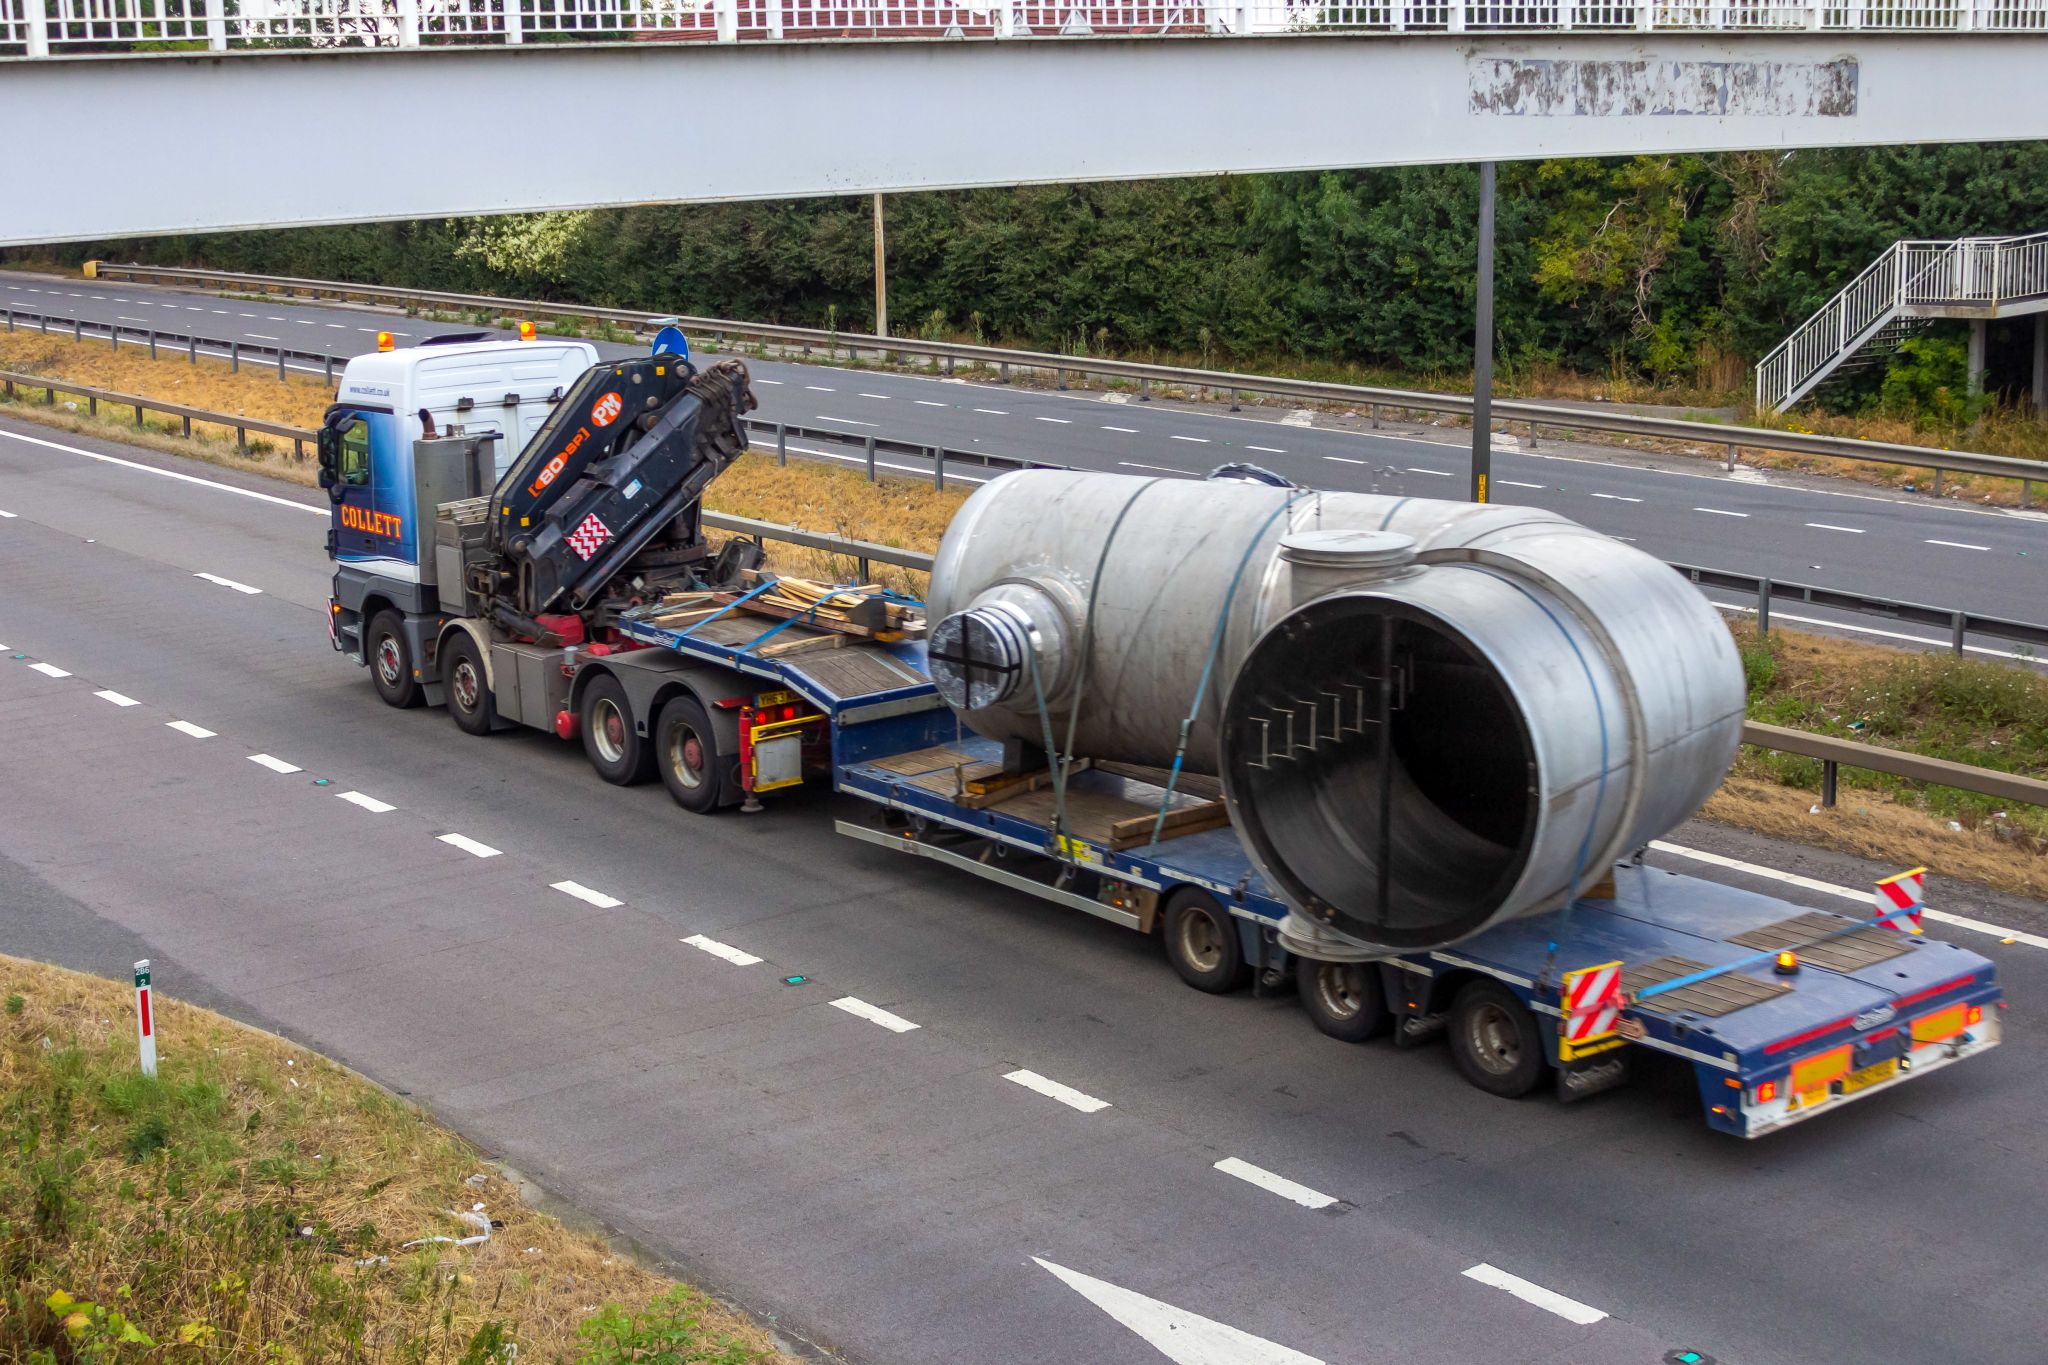 Abnormal Loads – latest on our campaigning